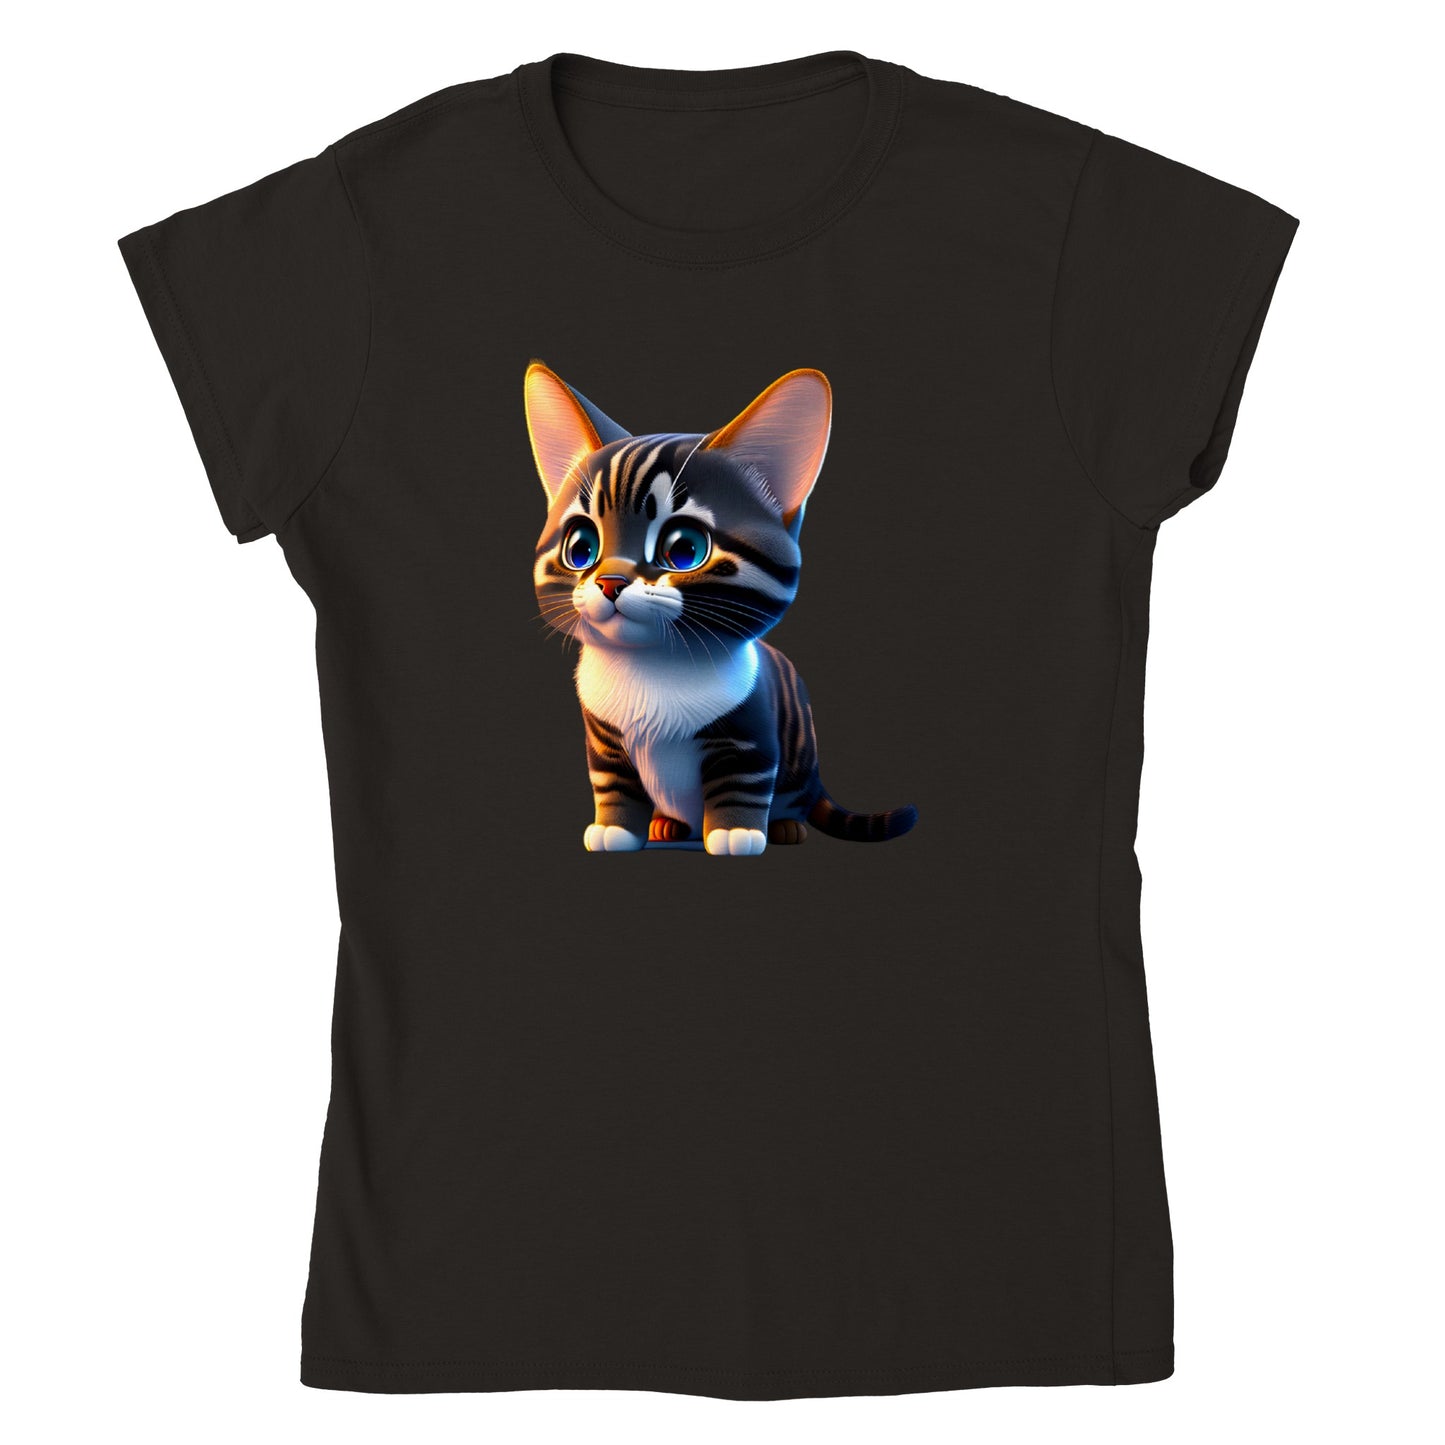 Adorable, Cool, Cute Cats and Kittens Toy - Classic Women’s Crewneck T-Shirt 35